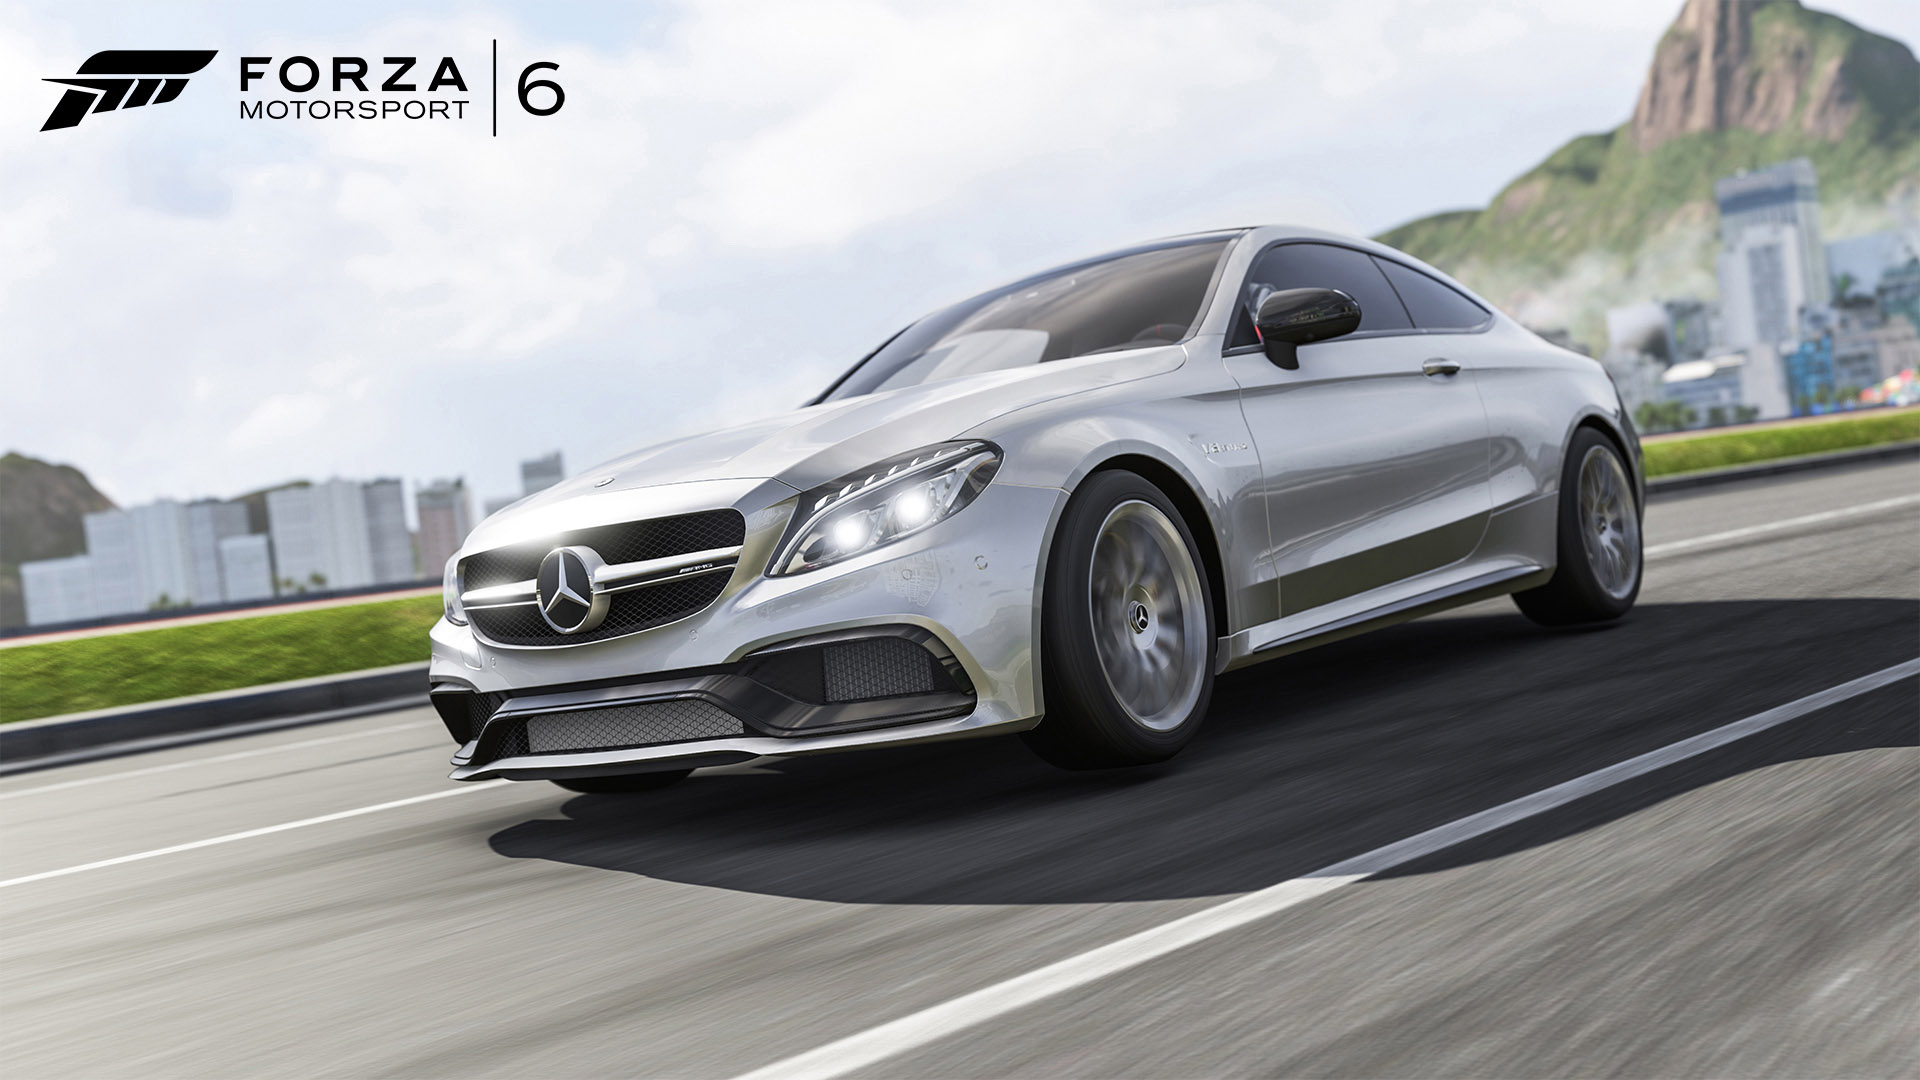 Mercedes-AMG C63 S Coupe for Forza Motorsport 6